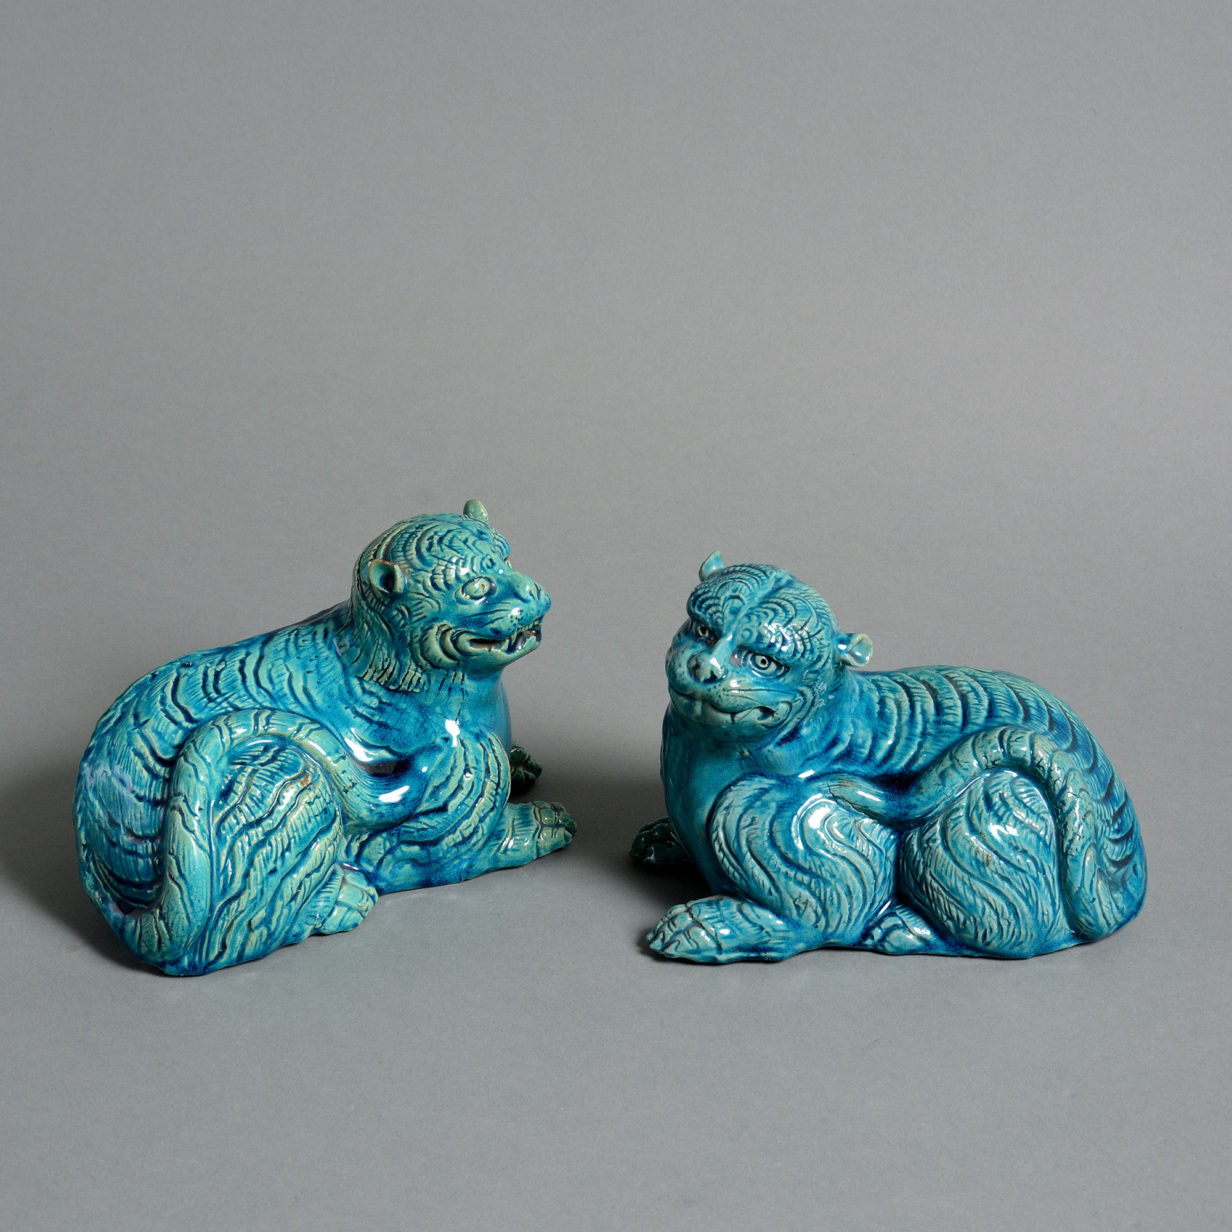 A pair of 19th century turquoise glazed porcelain tigers